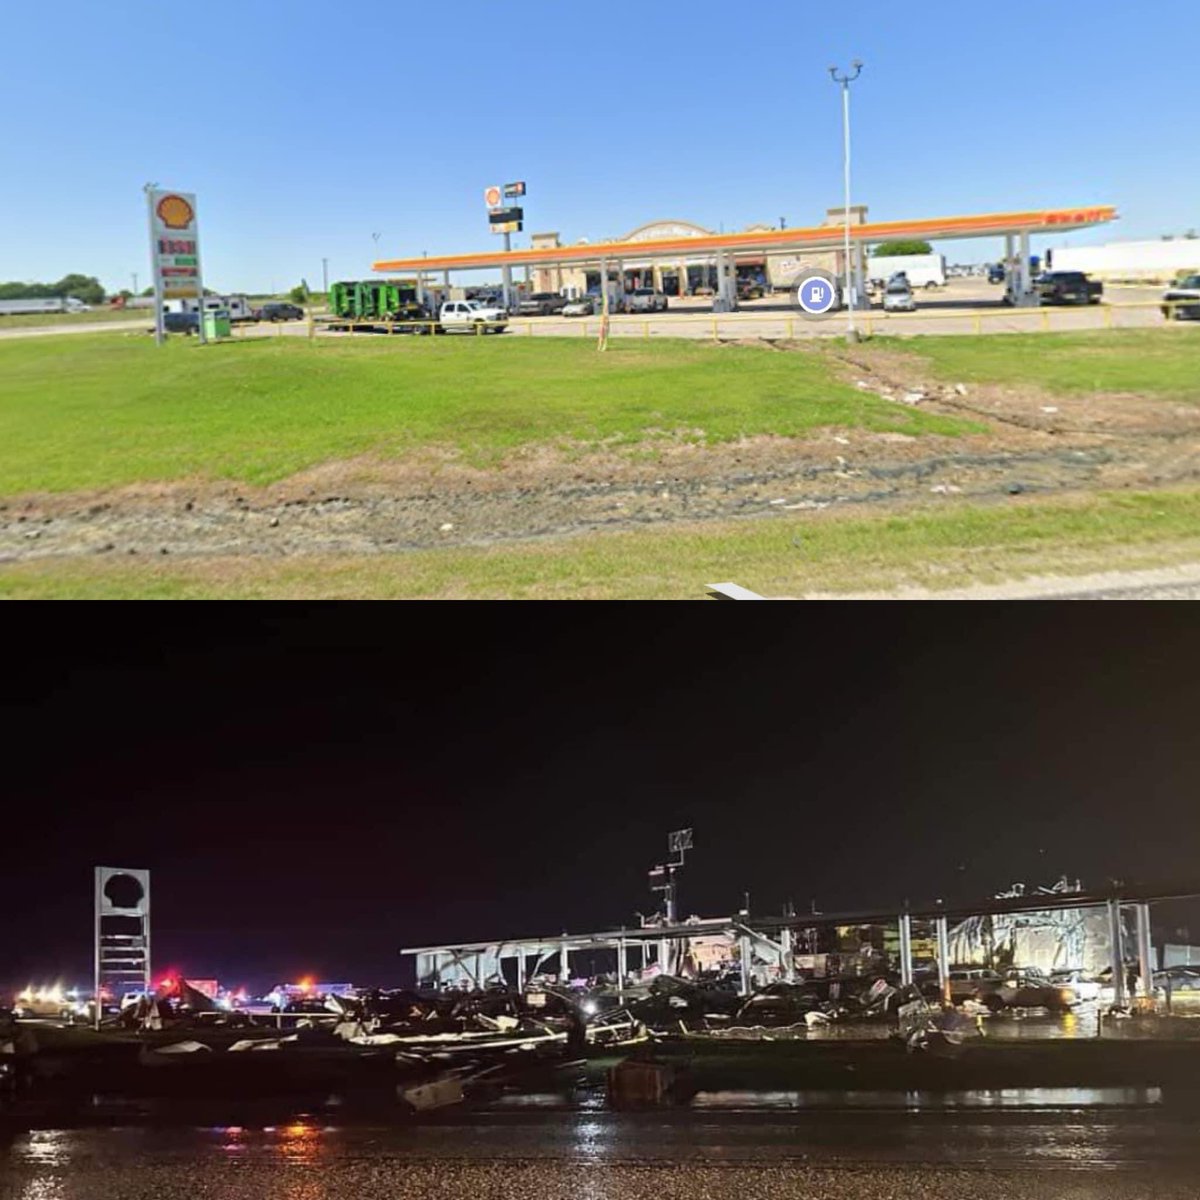 Shell Gateway 50 (One9 Fuel Network) Truck Stop in Valley View, TX where a violent tornado struck.